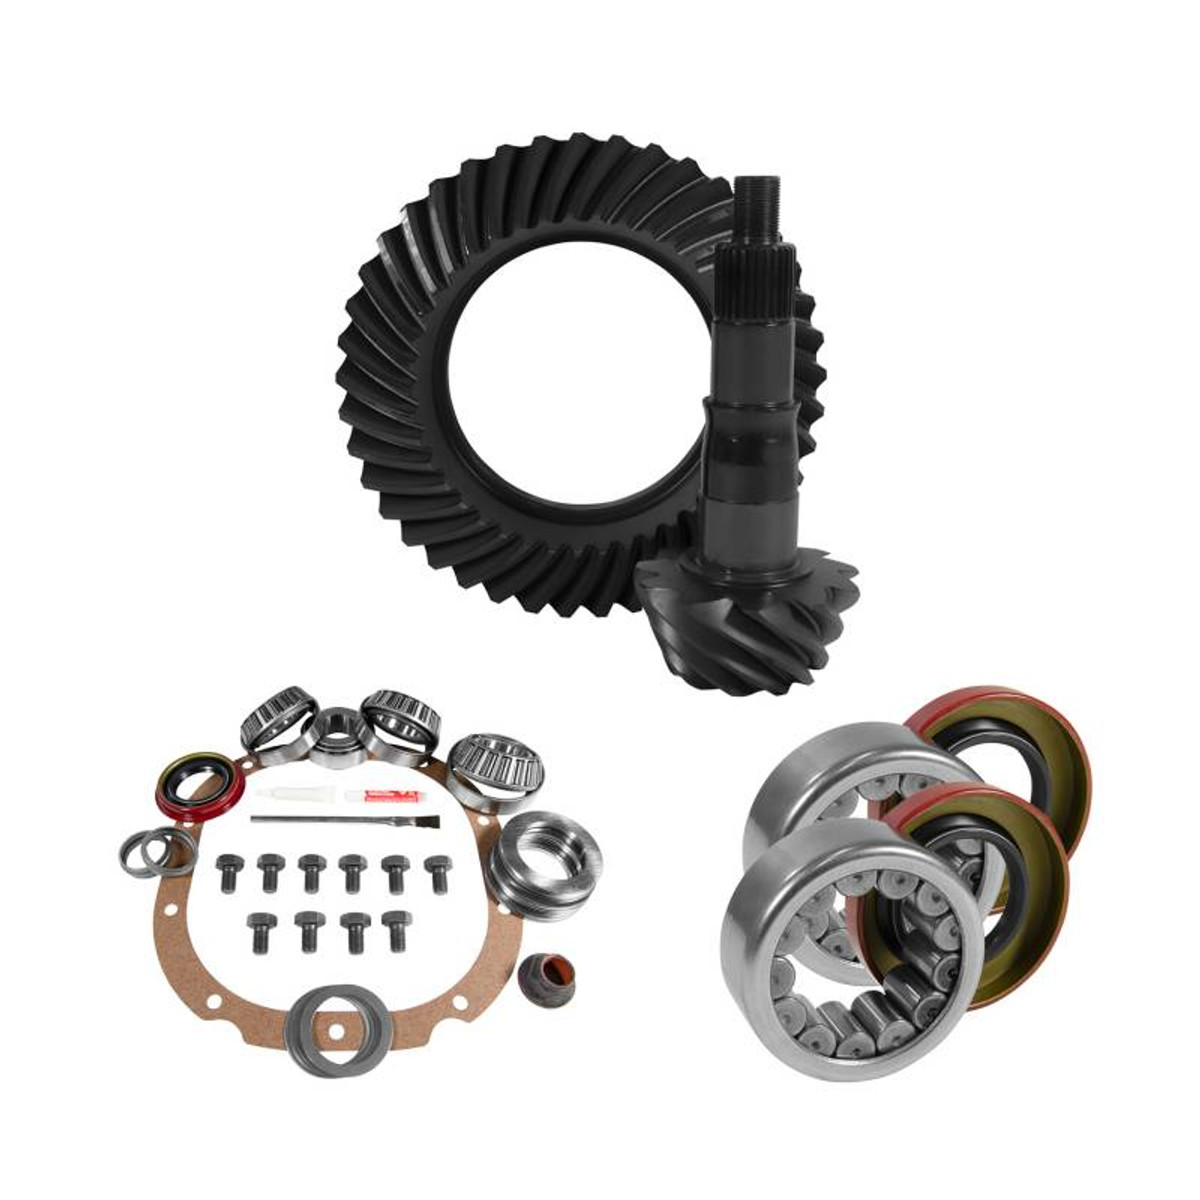 8.8 inch Ford 3.73 Rear Ring and Pinion Install Kit 2.99 inch OD Axle Bearings and Seals YGK2066